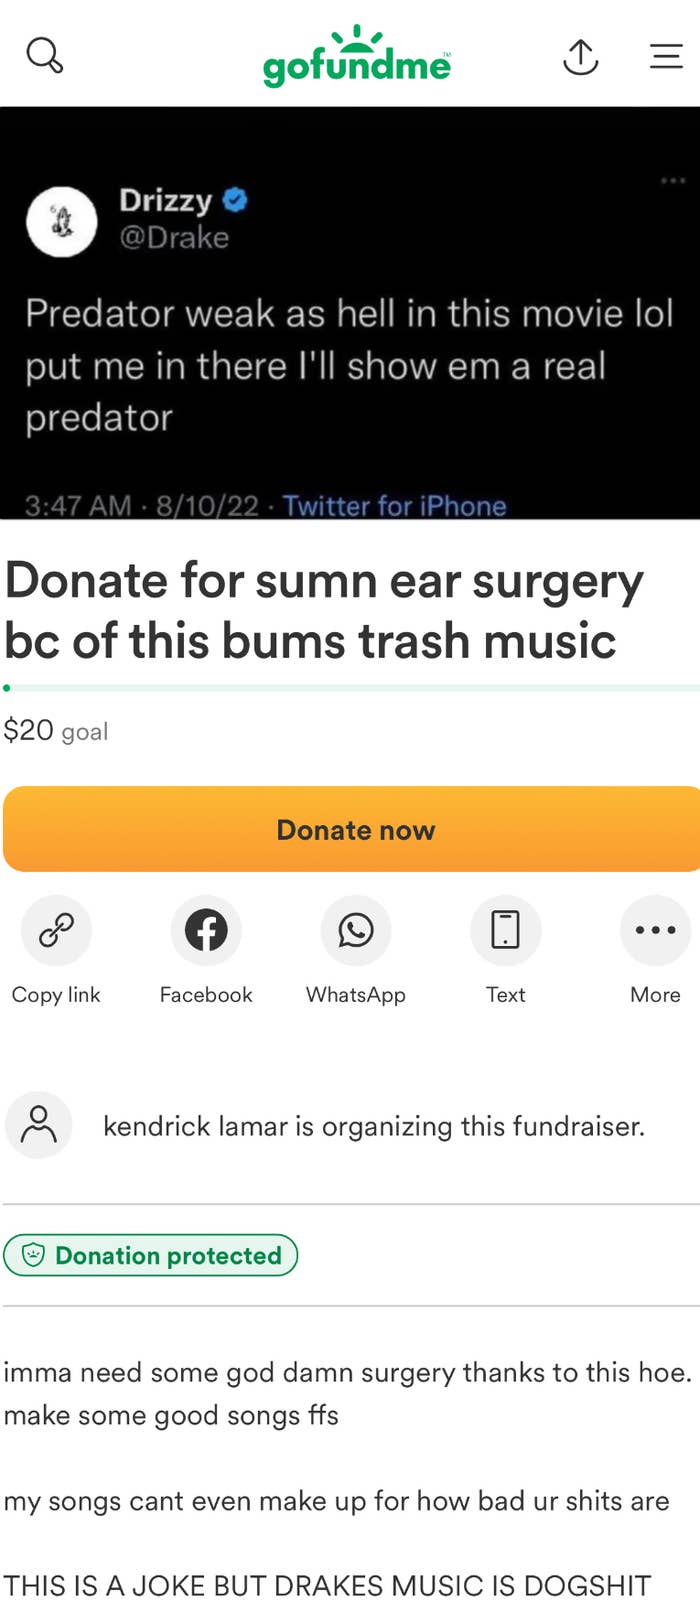 Summarized text: Social media posts joking about an ear surgery fundraiser; includes tweets from Drake and Kendrick Lamar parody accounts